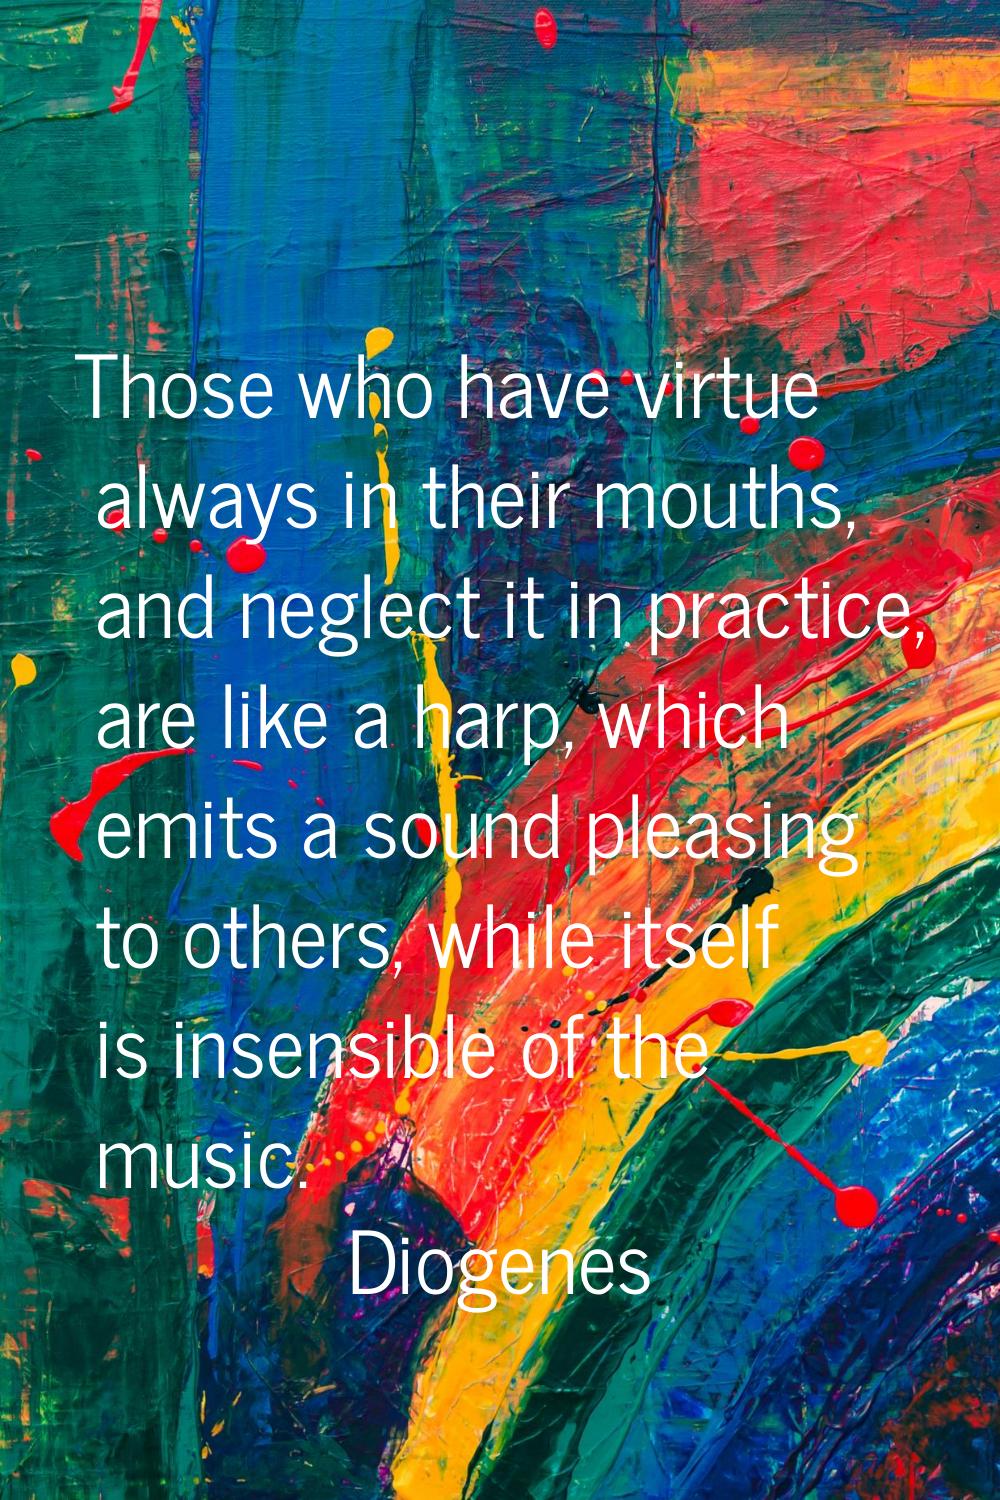 Those who have virtue always in their mouths, and neglect it in practice, are like a harp, which em